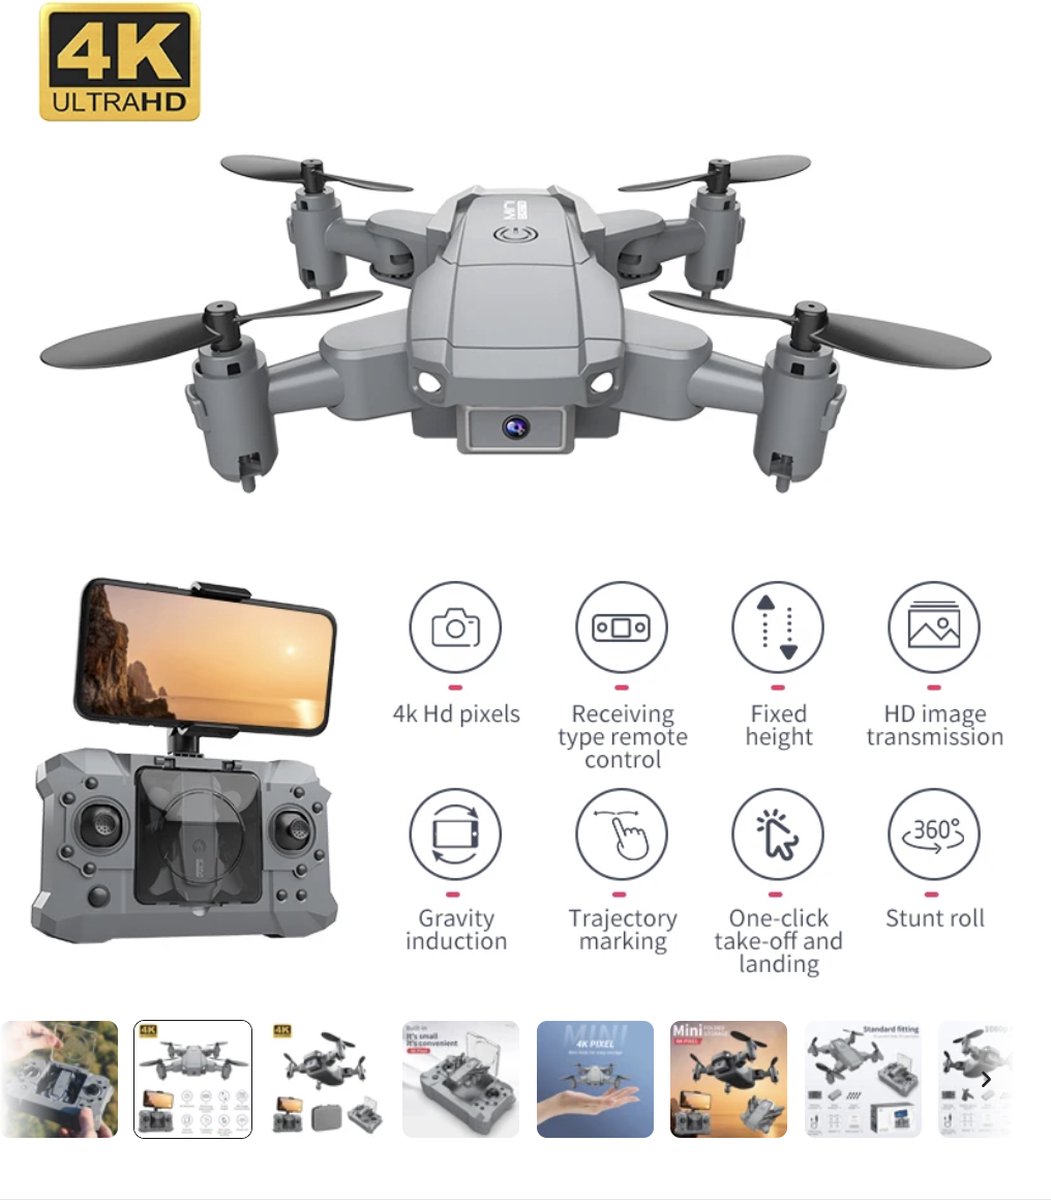 Mini Drone 4K - Camera Hd - Opvouwbare Quadcopter - One-Key Terugkeer - Fpv Follow Me - Rc Helicopter - Quadrocopter.